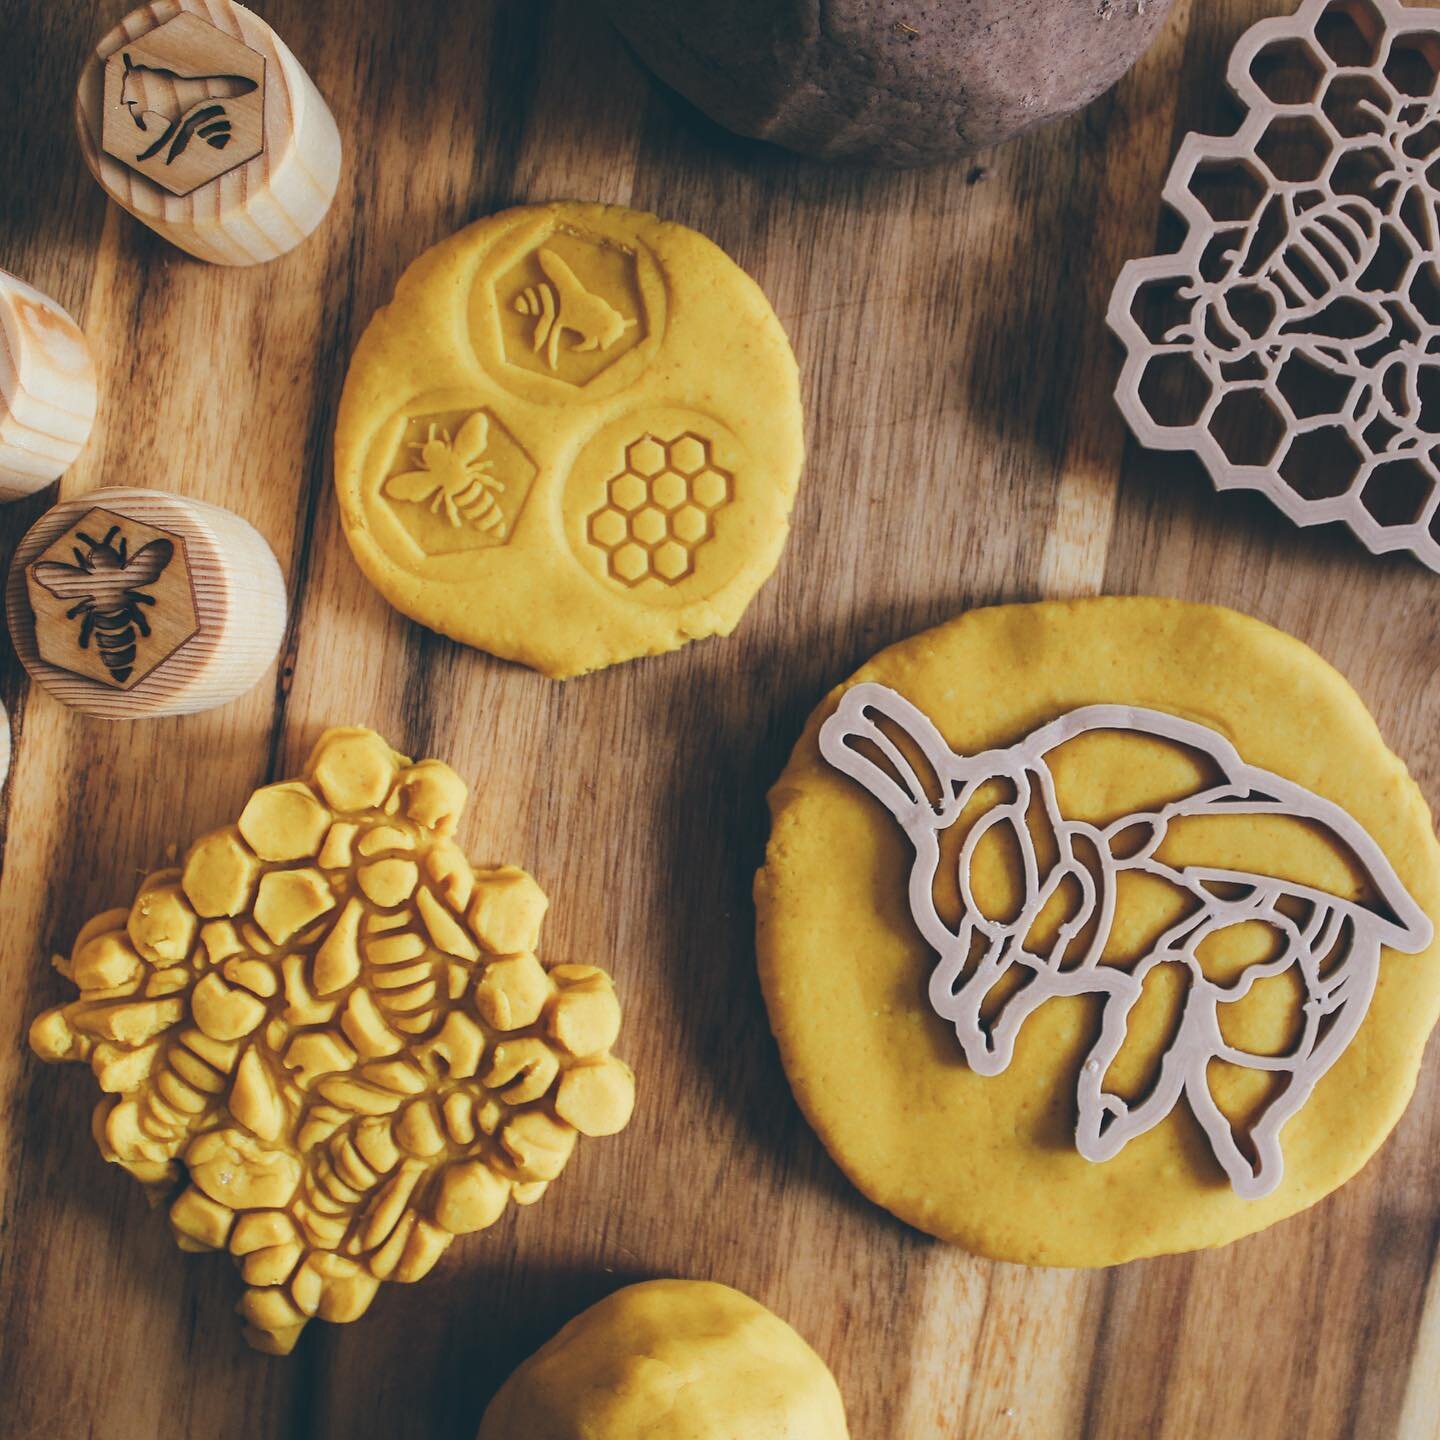 Time for a fresh batch of play dough! We used turmeric to colour the yellow and cinnamon, nutmeg and allspice to colour the brown. The smell is divine ✨
🌳
My 3.5yr old is obsessed with insects at the moment. He would be outside 24/7 hunting for bugs